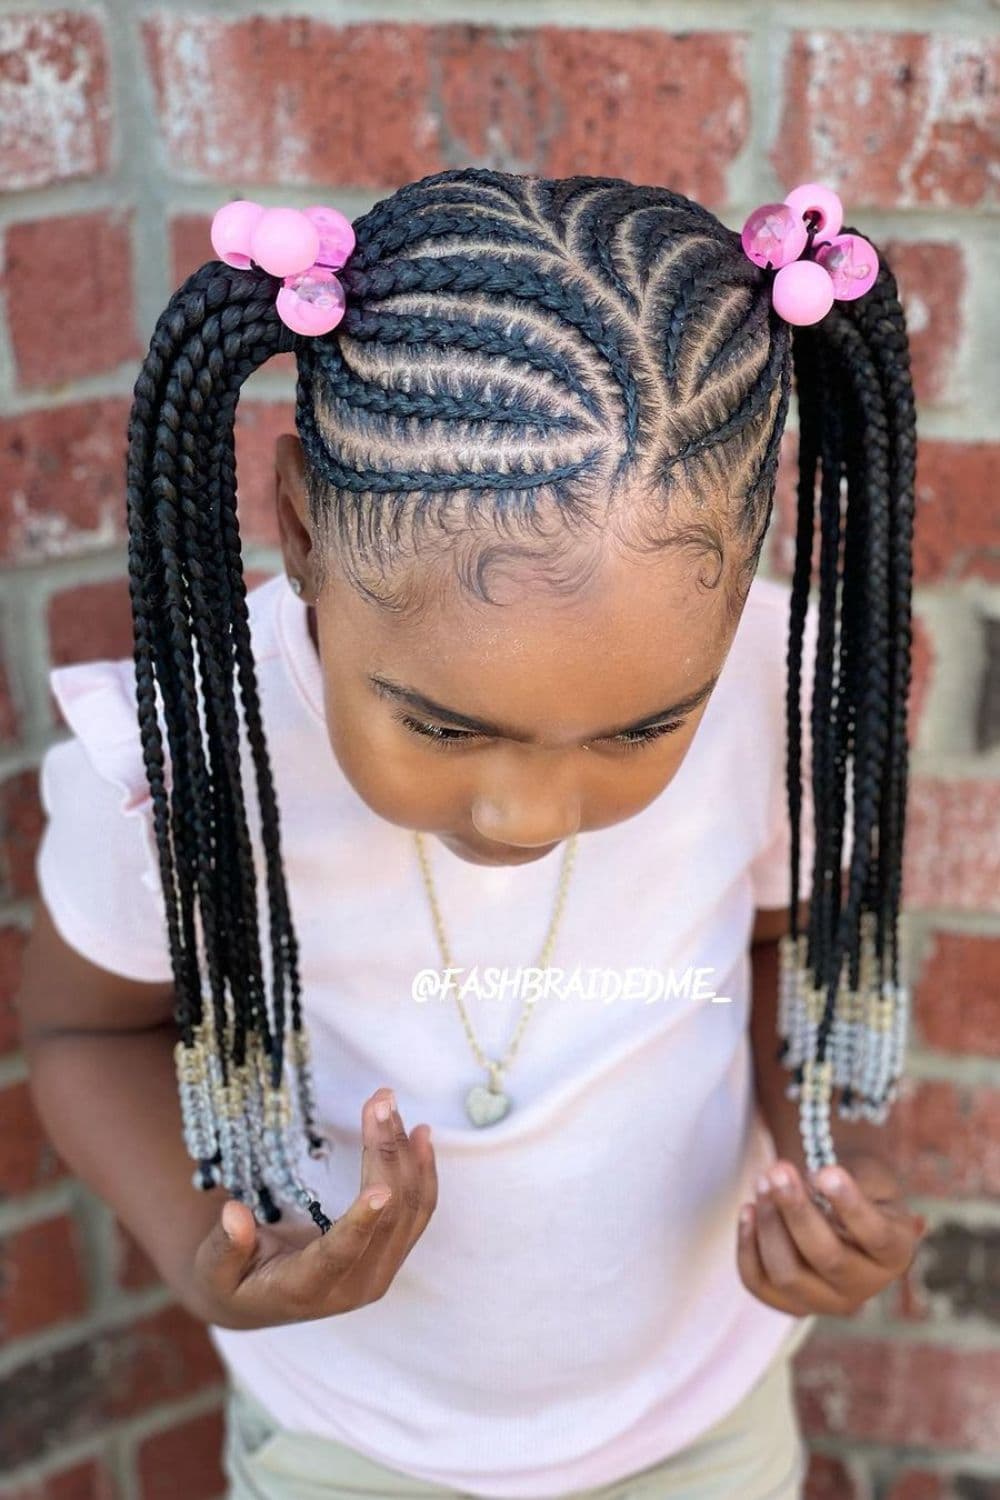 A little girl with two-sided braids with pink and clear beads.